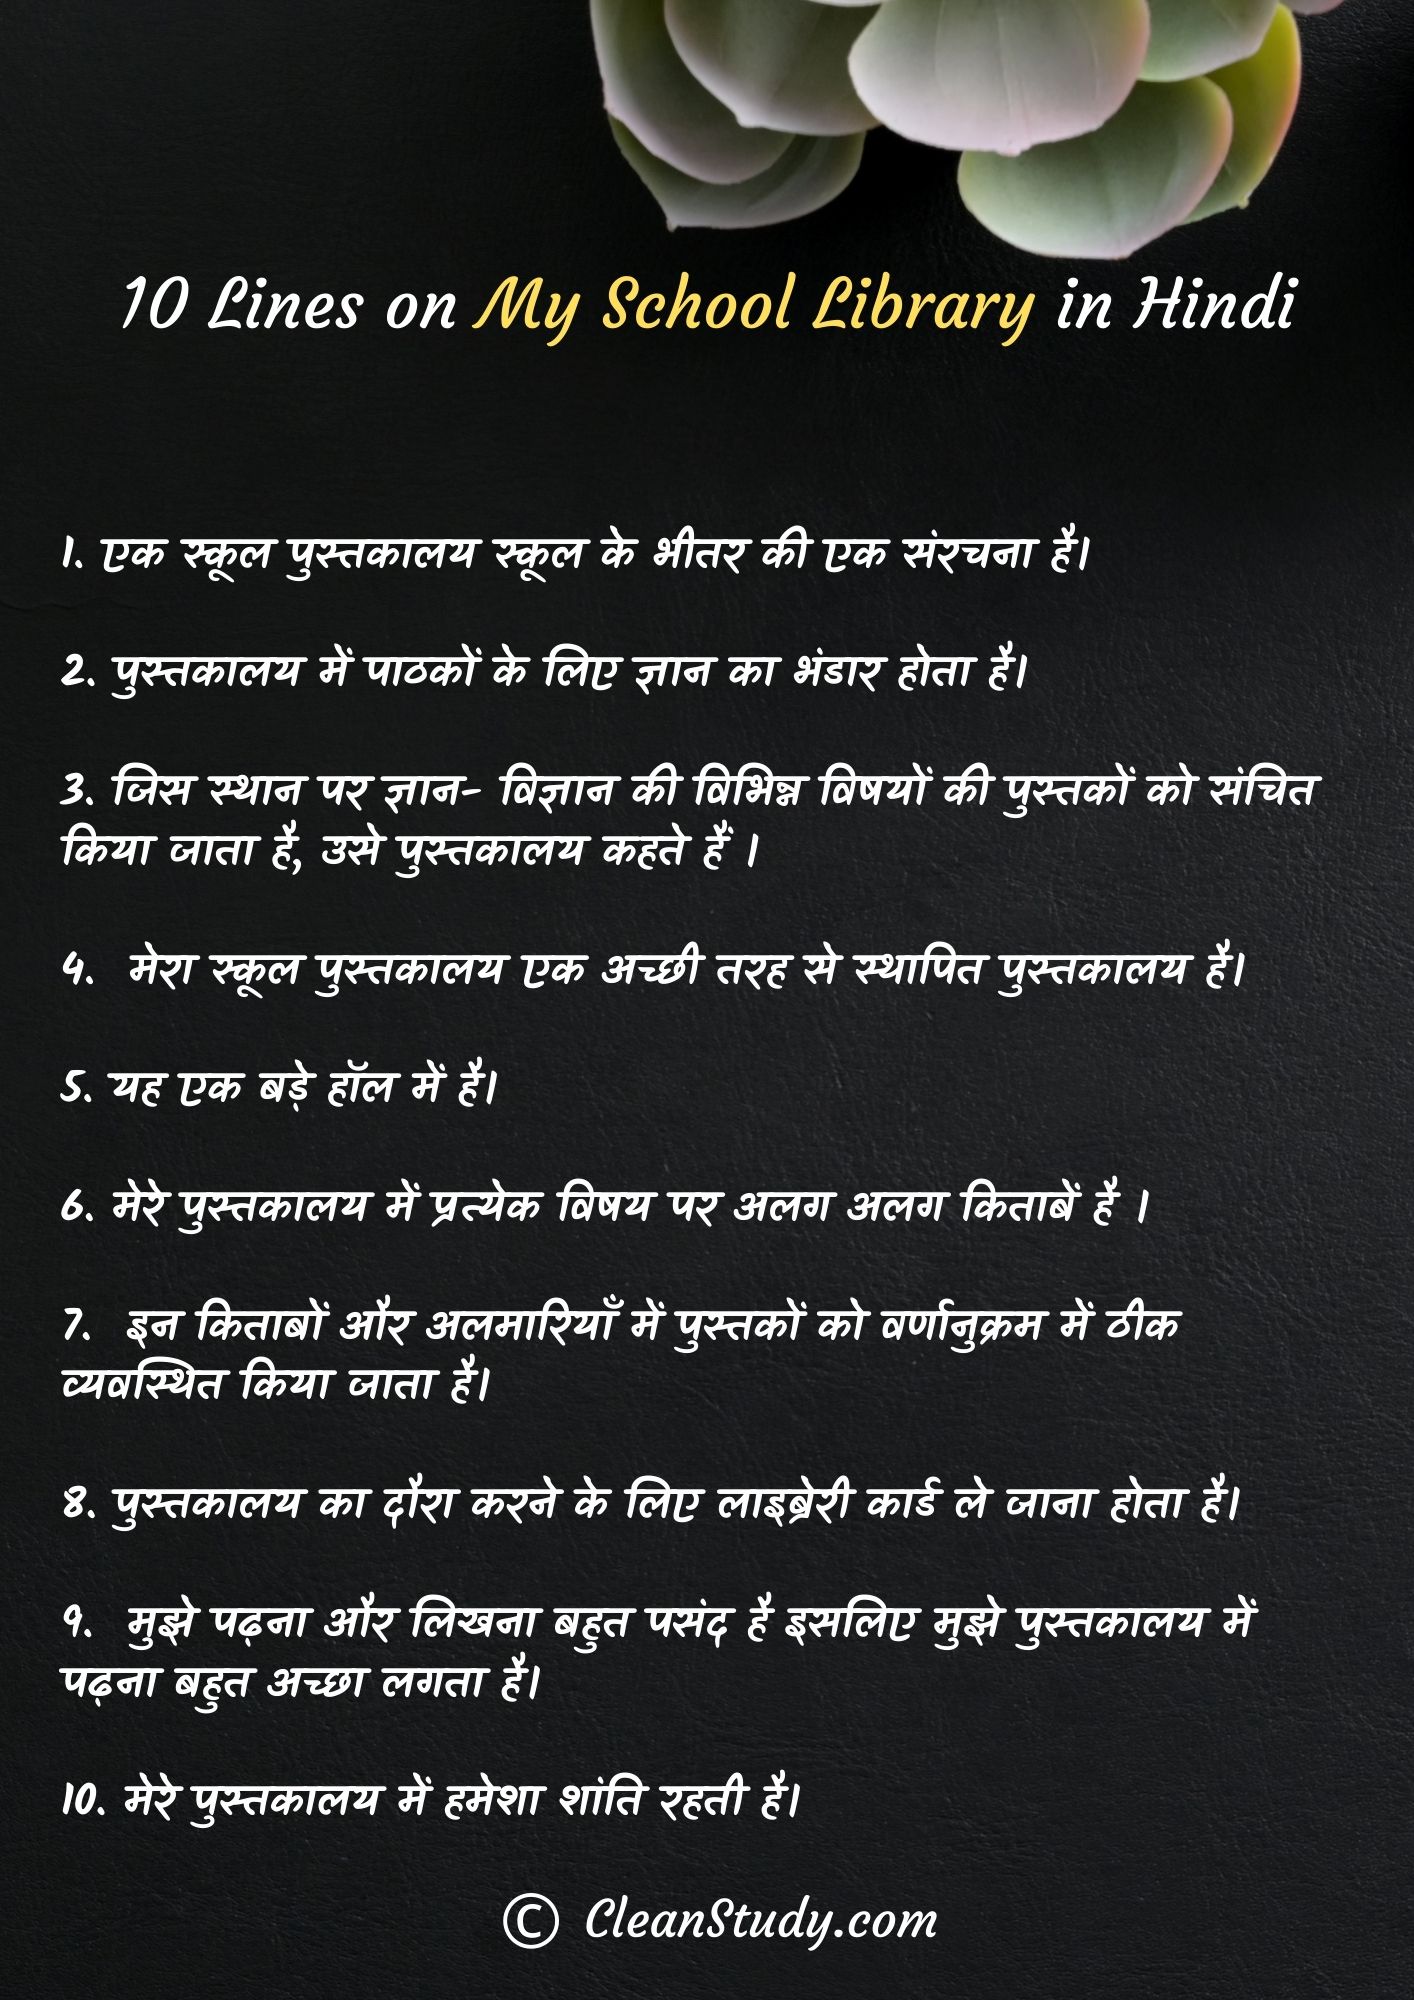 10 Lines on My School Library in Hindi